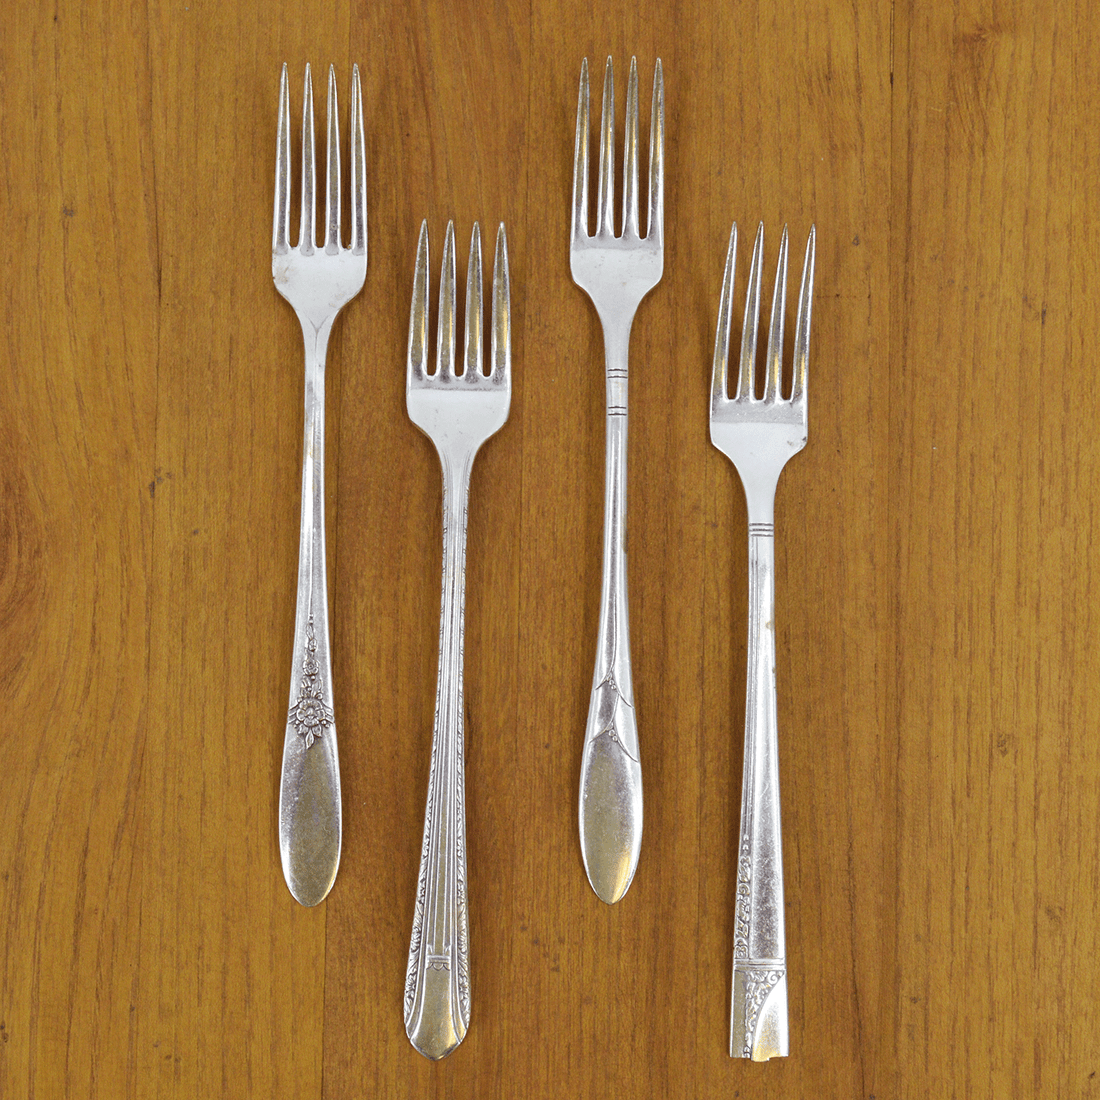 Elegant table setting with mint green plates, Hester &amp; Cook vintage silver-plate long handled salad fork set of four, and white tulips on a marble surface.